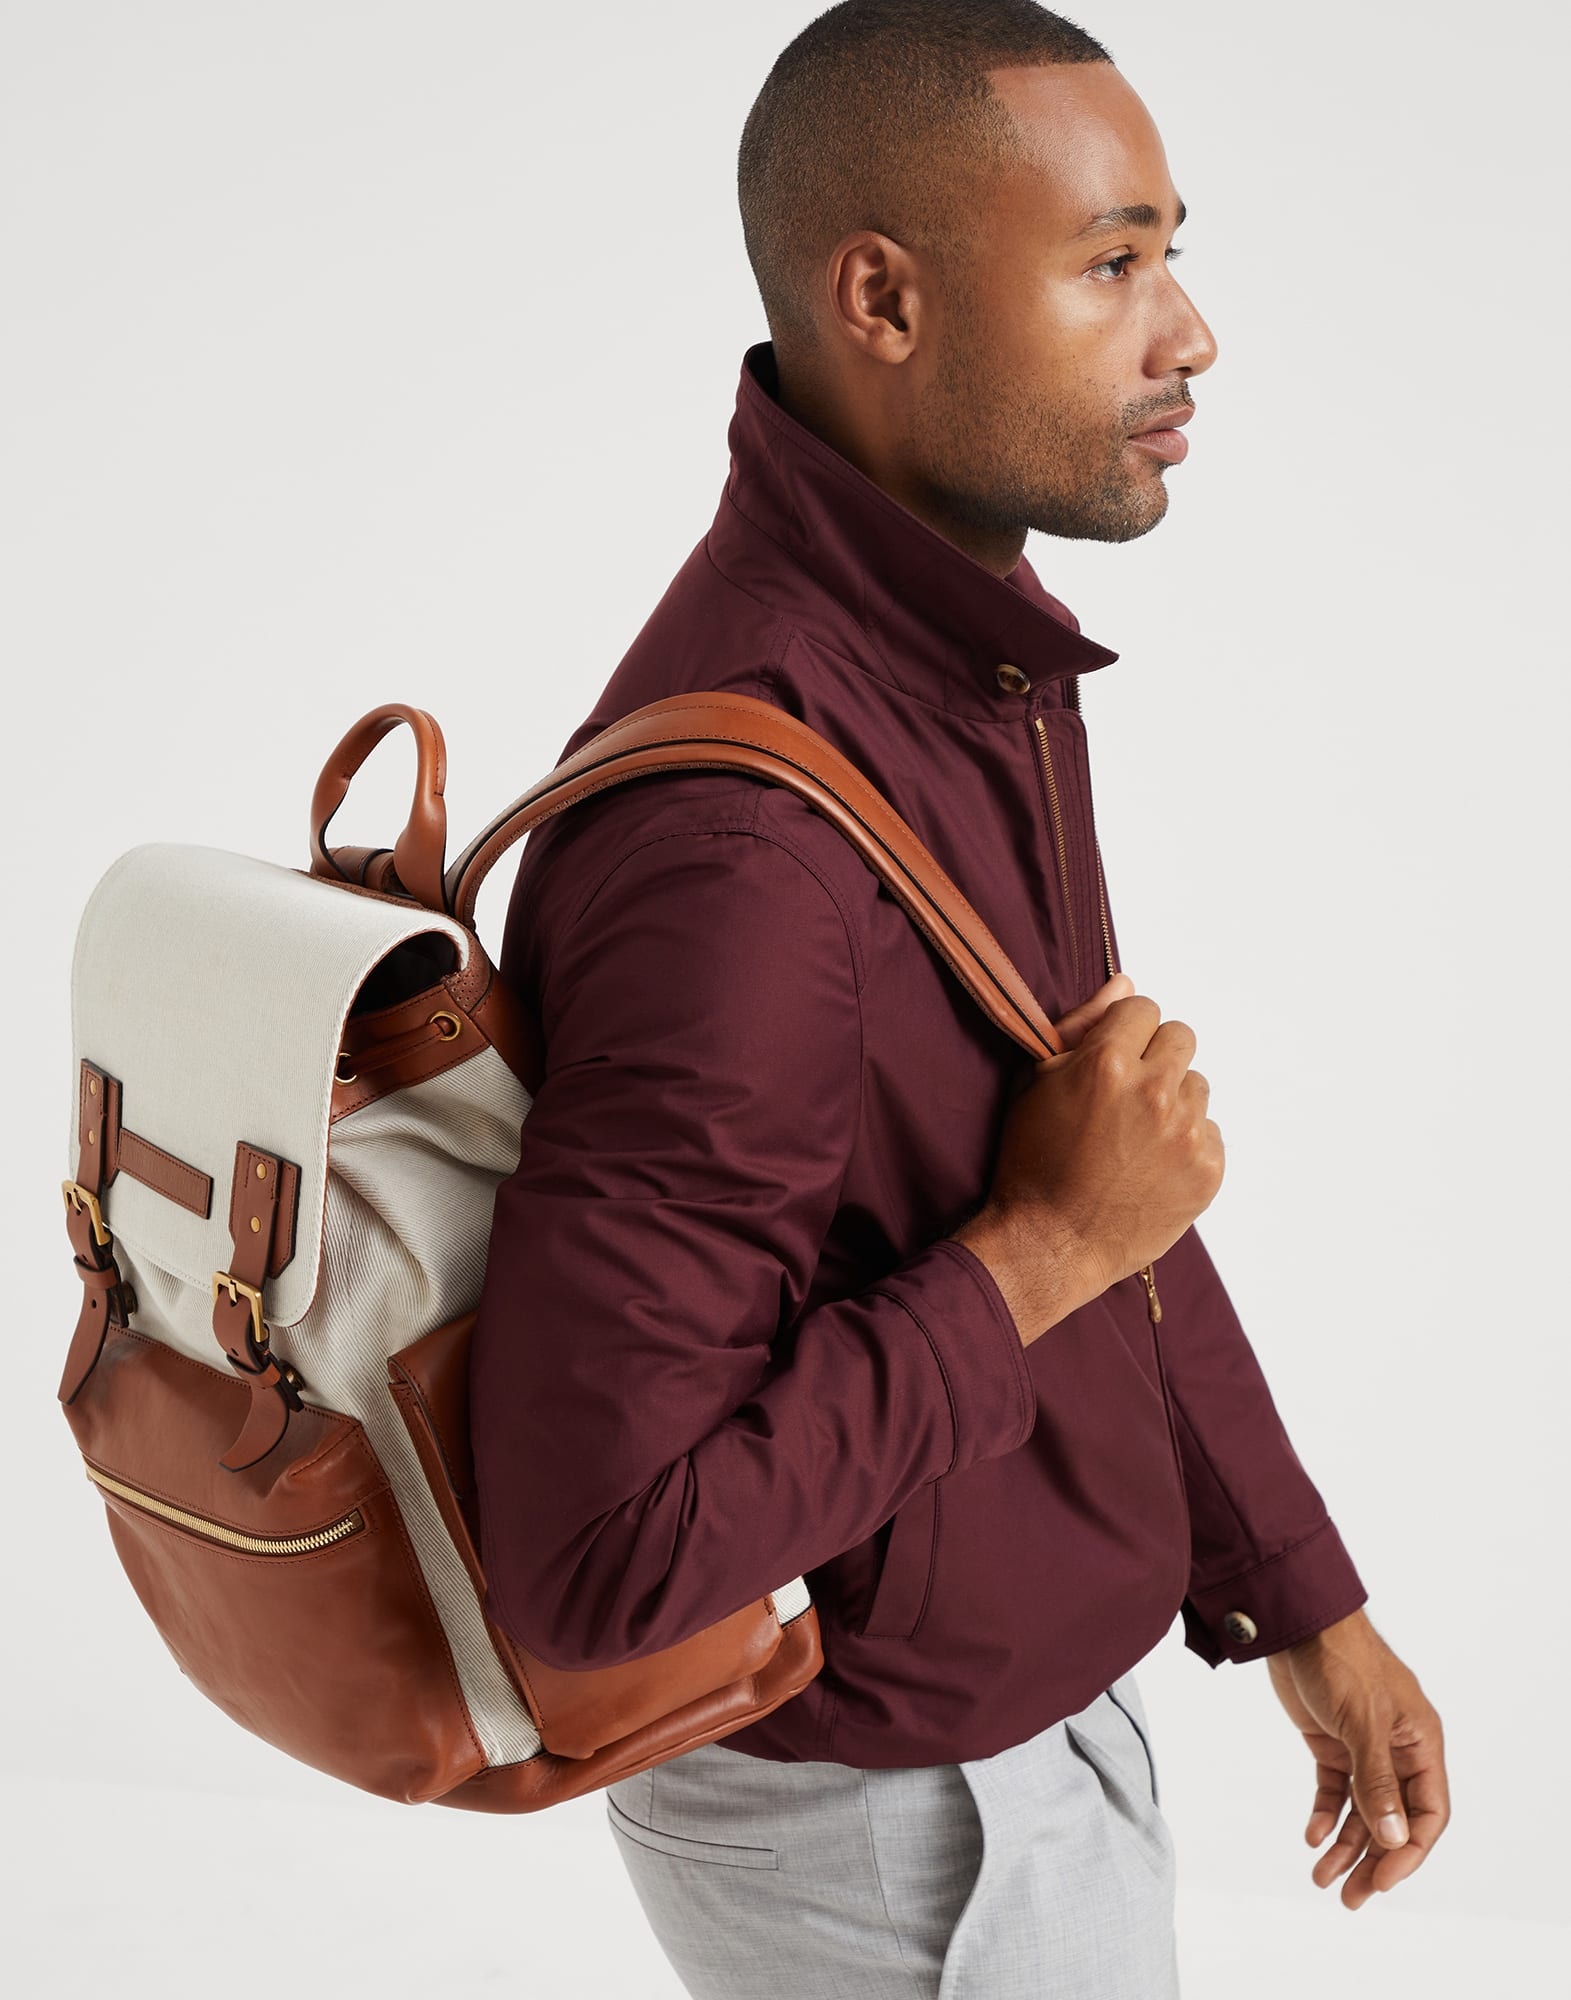 Cotton and linen cavalry and calfskin city backpack - 4